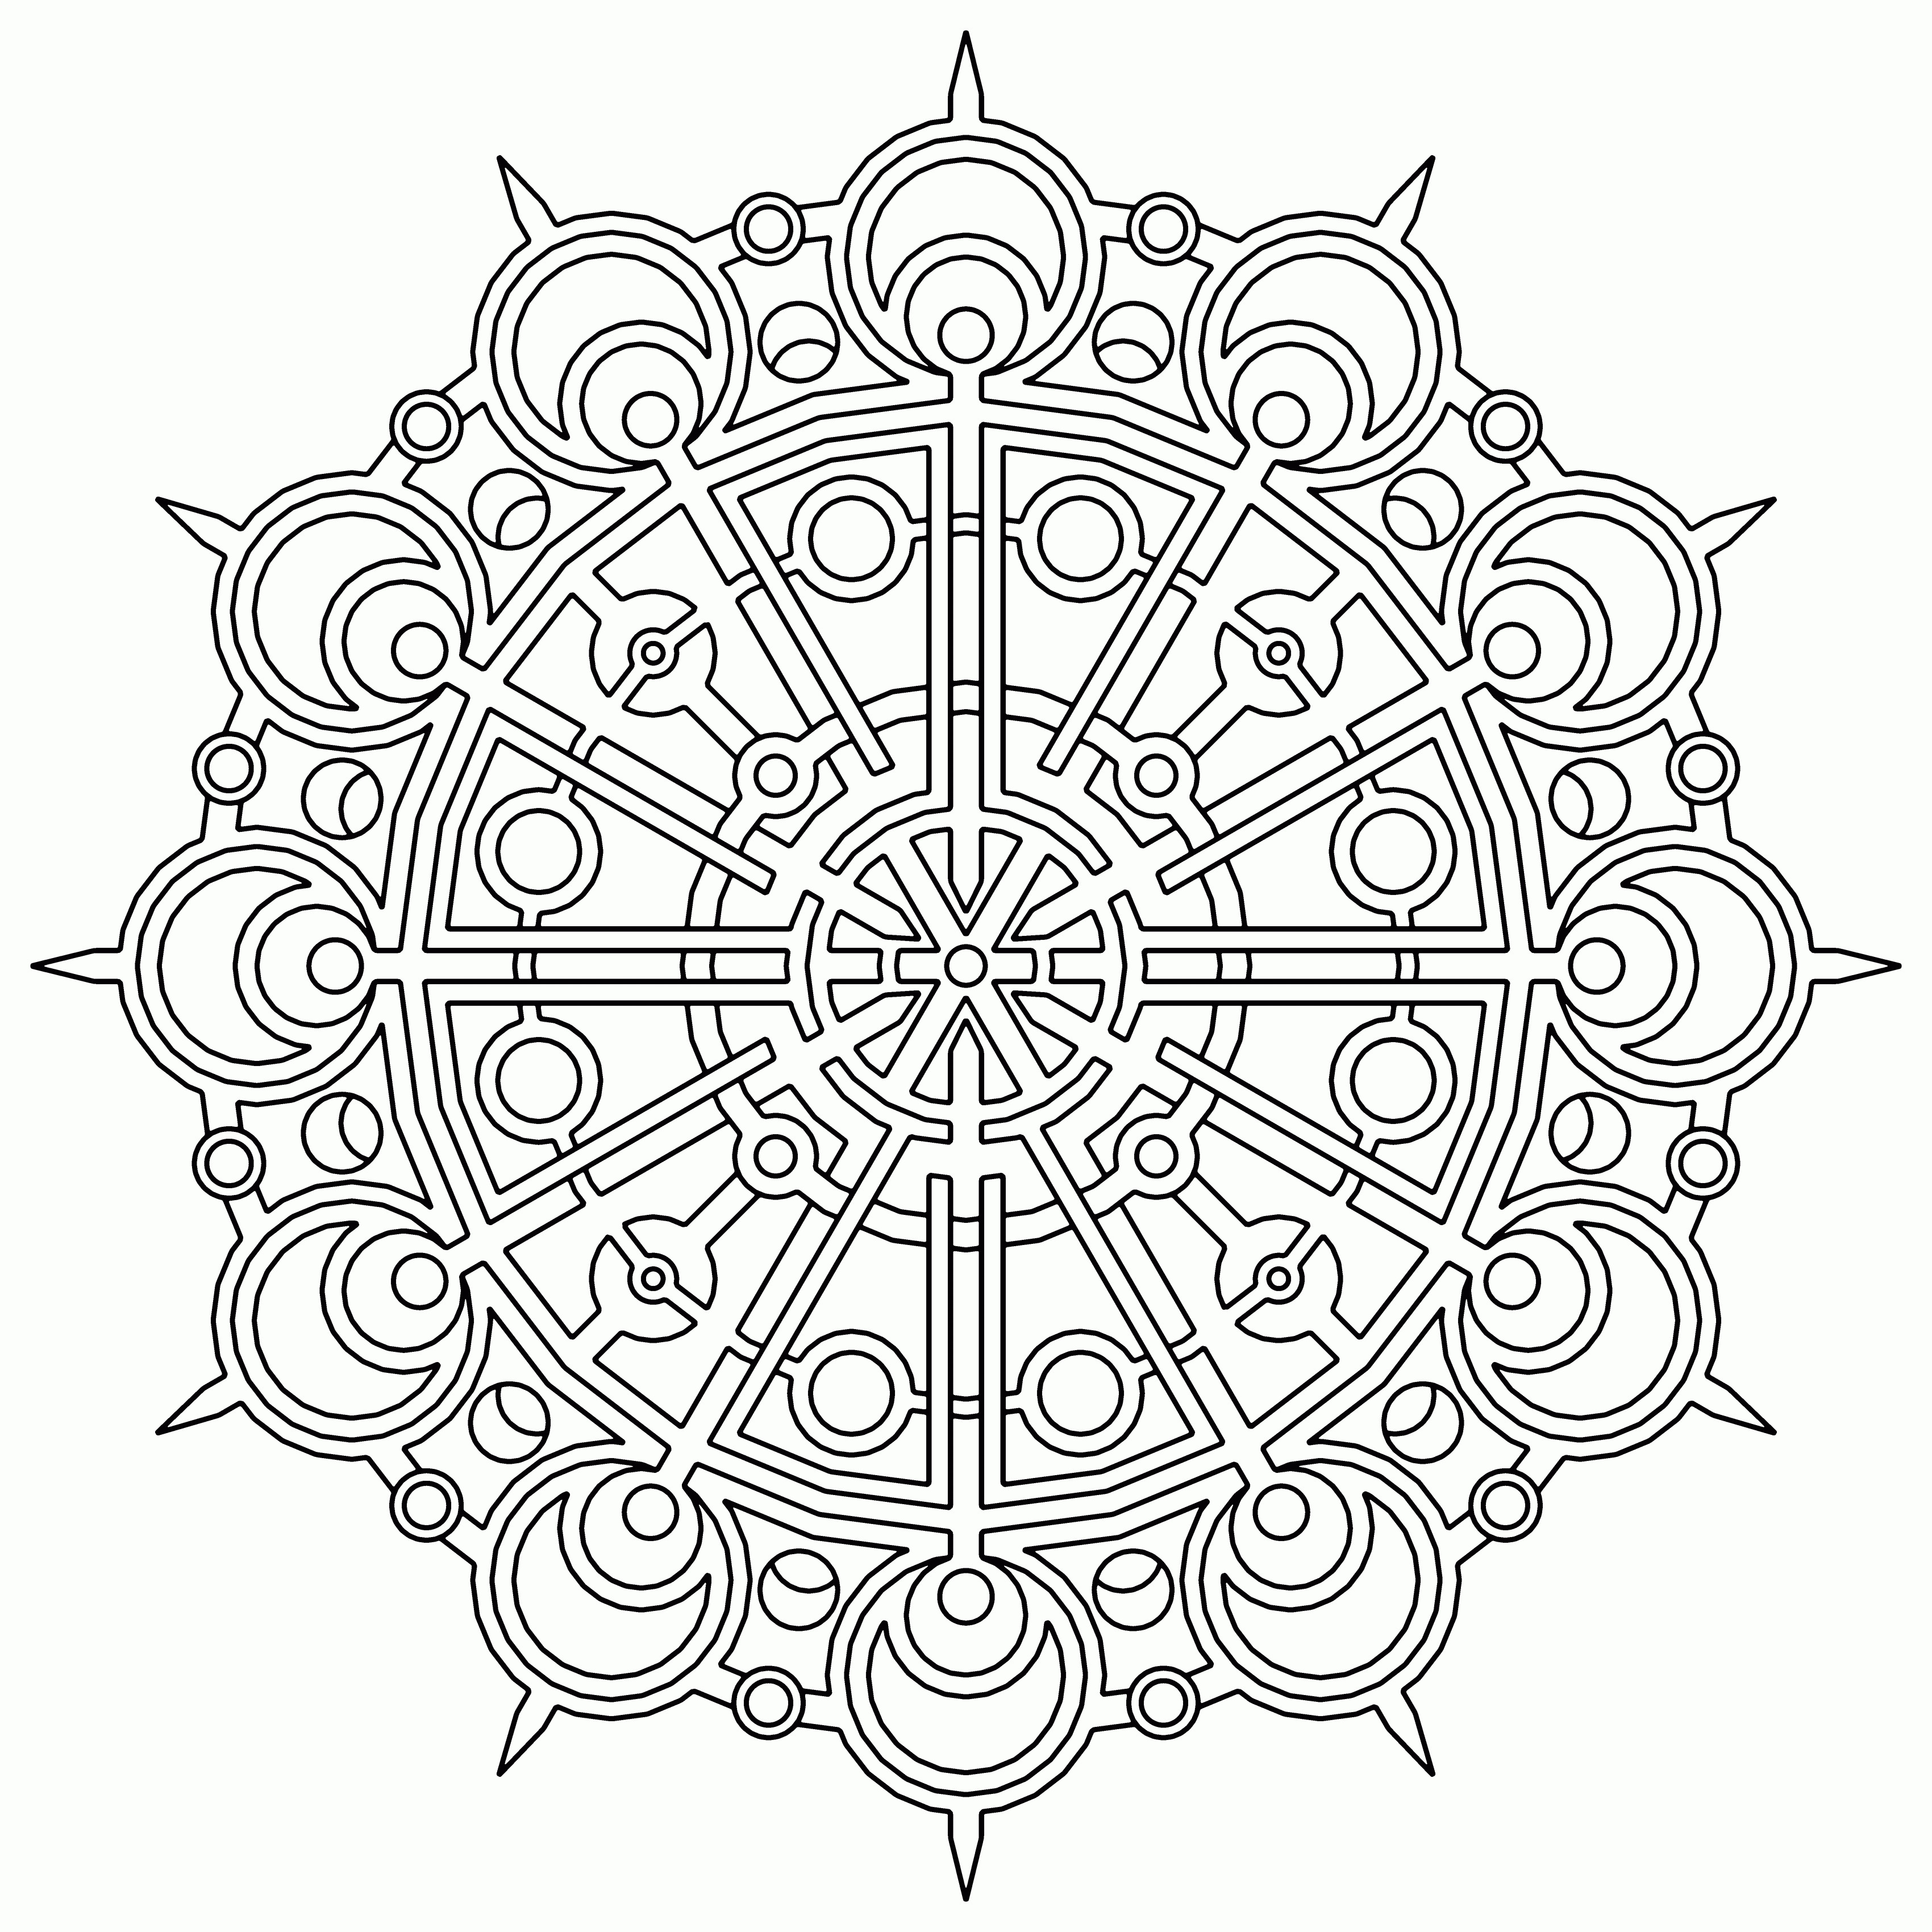 Free Geometric Coloring Pages For Adults
 Free Printable Geometric Coloring Pages For Adults